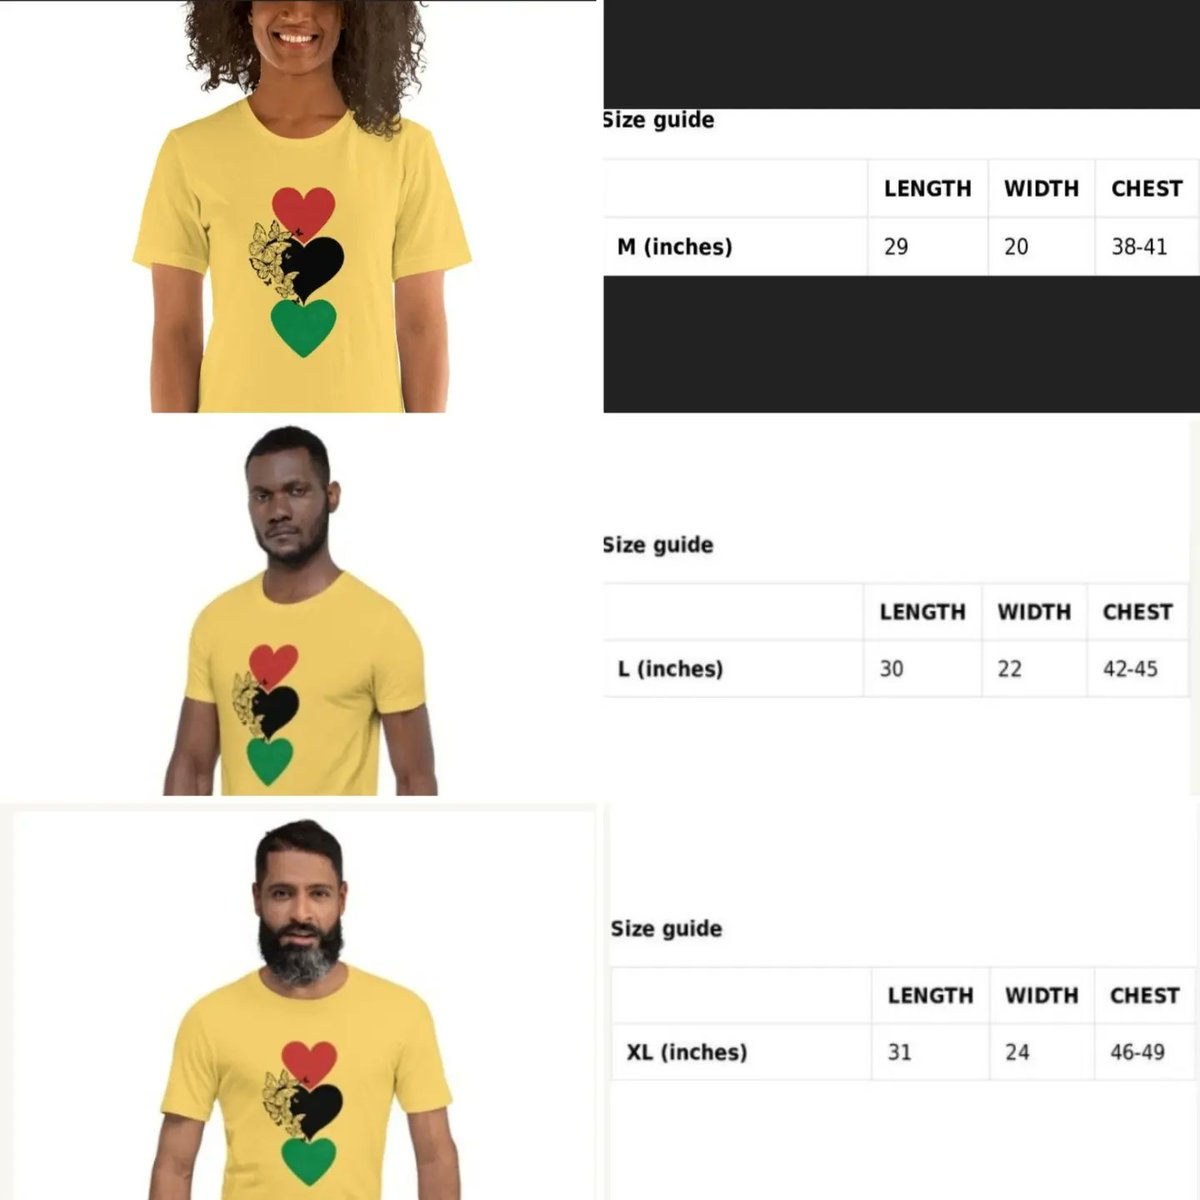 Juneteeth is coming. Tees available here. 
I'm wearing a sample in white. 3 sizes available in yellow. Select the corresponding picture on Etsy. 
Thanks😊❤️🖤💚
#Tee #TShirt #Tshirts #juneteenth #PanAfrican #Hearts #Butterflies #Unisex #Inclusive #RedBlackAndGreen #RedBlackGreen